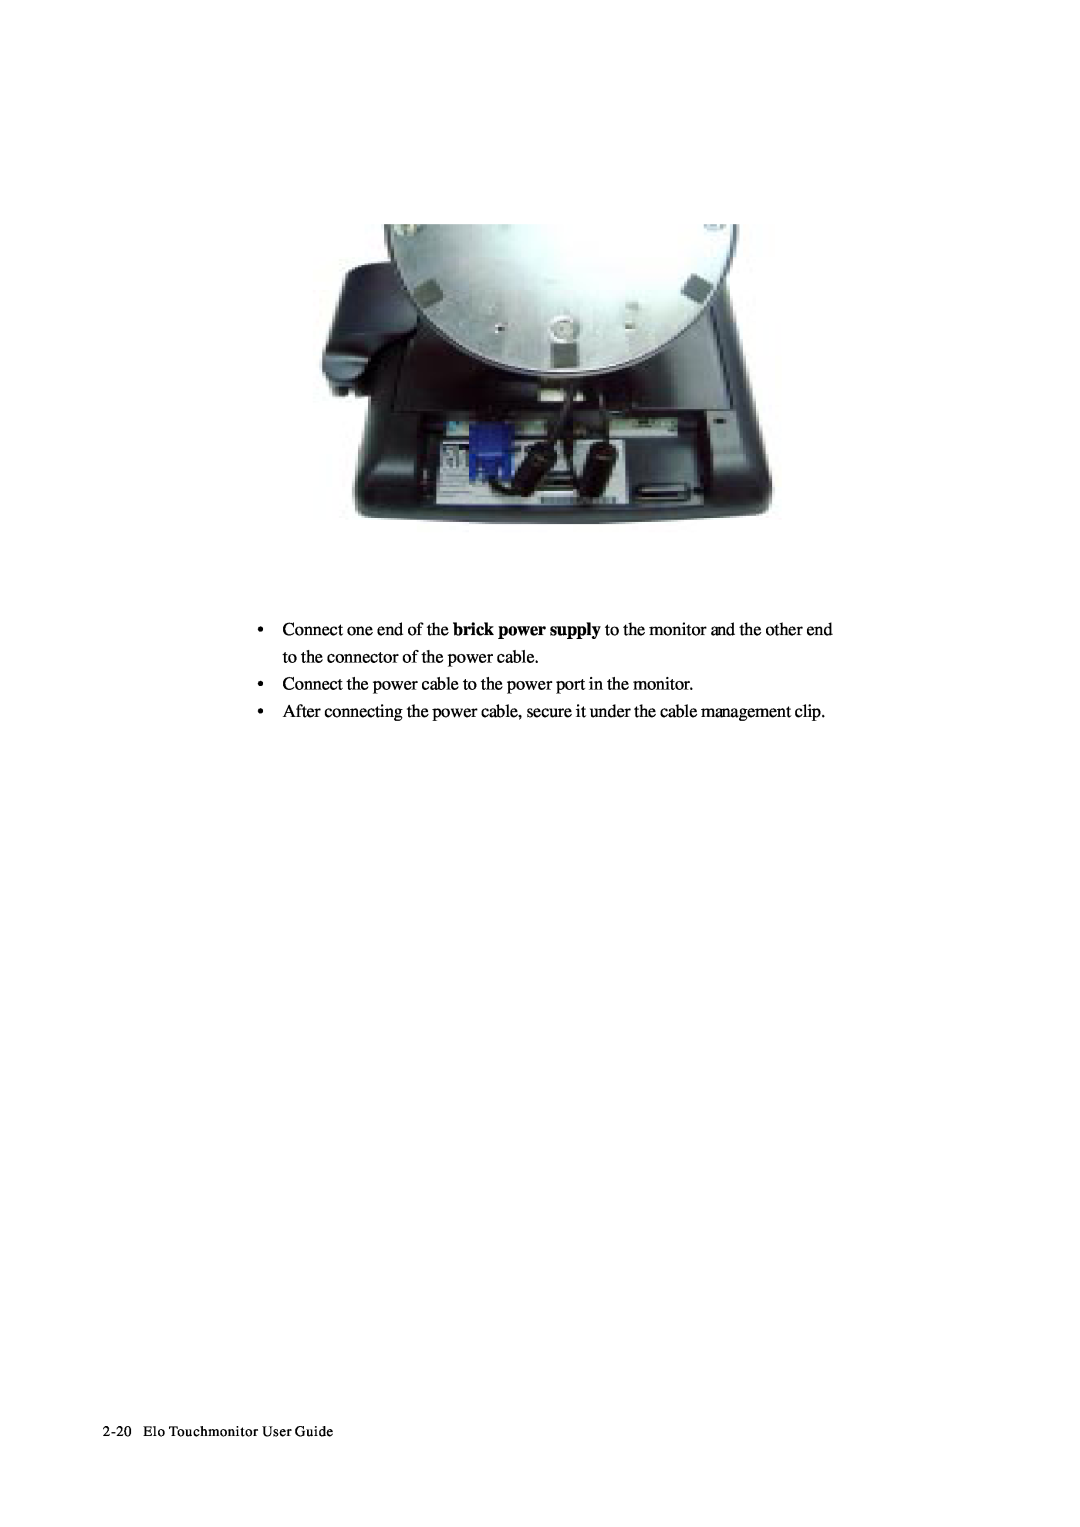 Tyco Electronics 1229L manual Elo Touchmonitor User Guide 